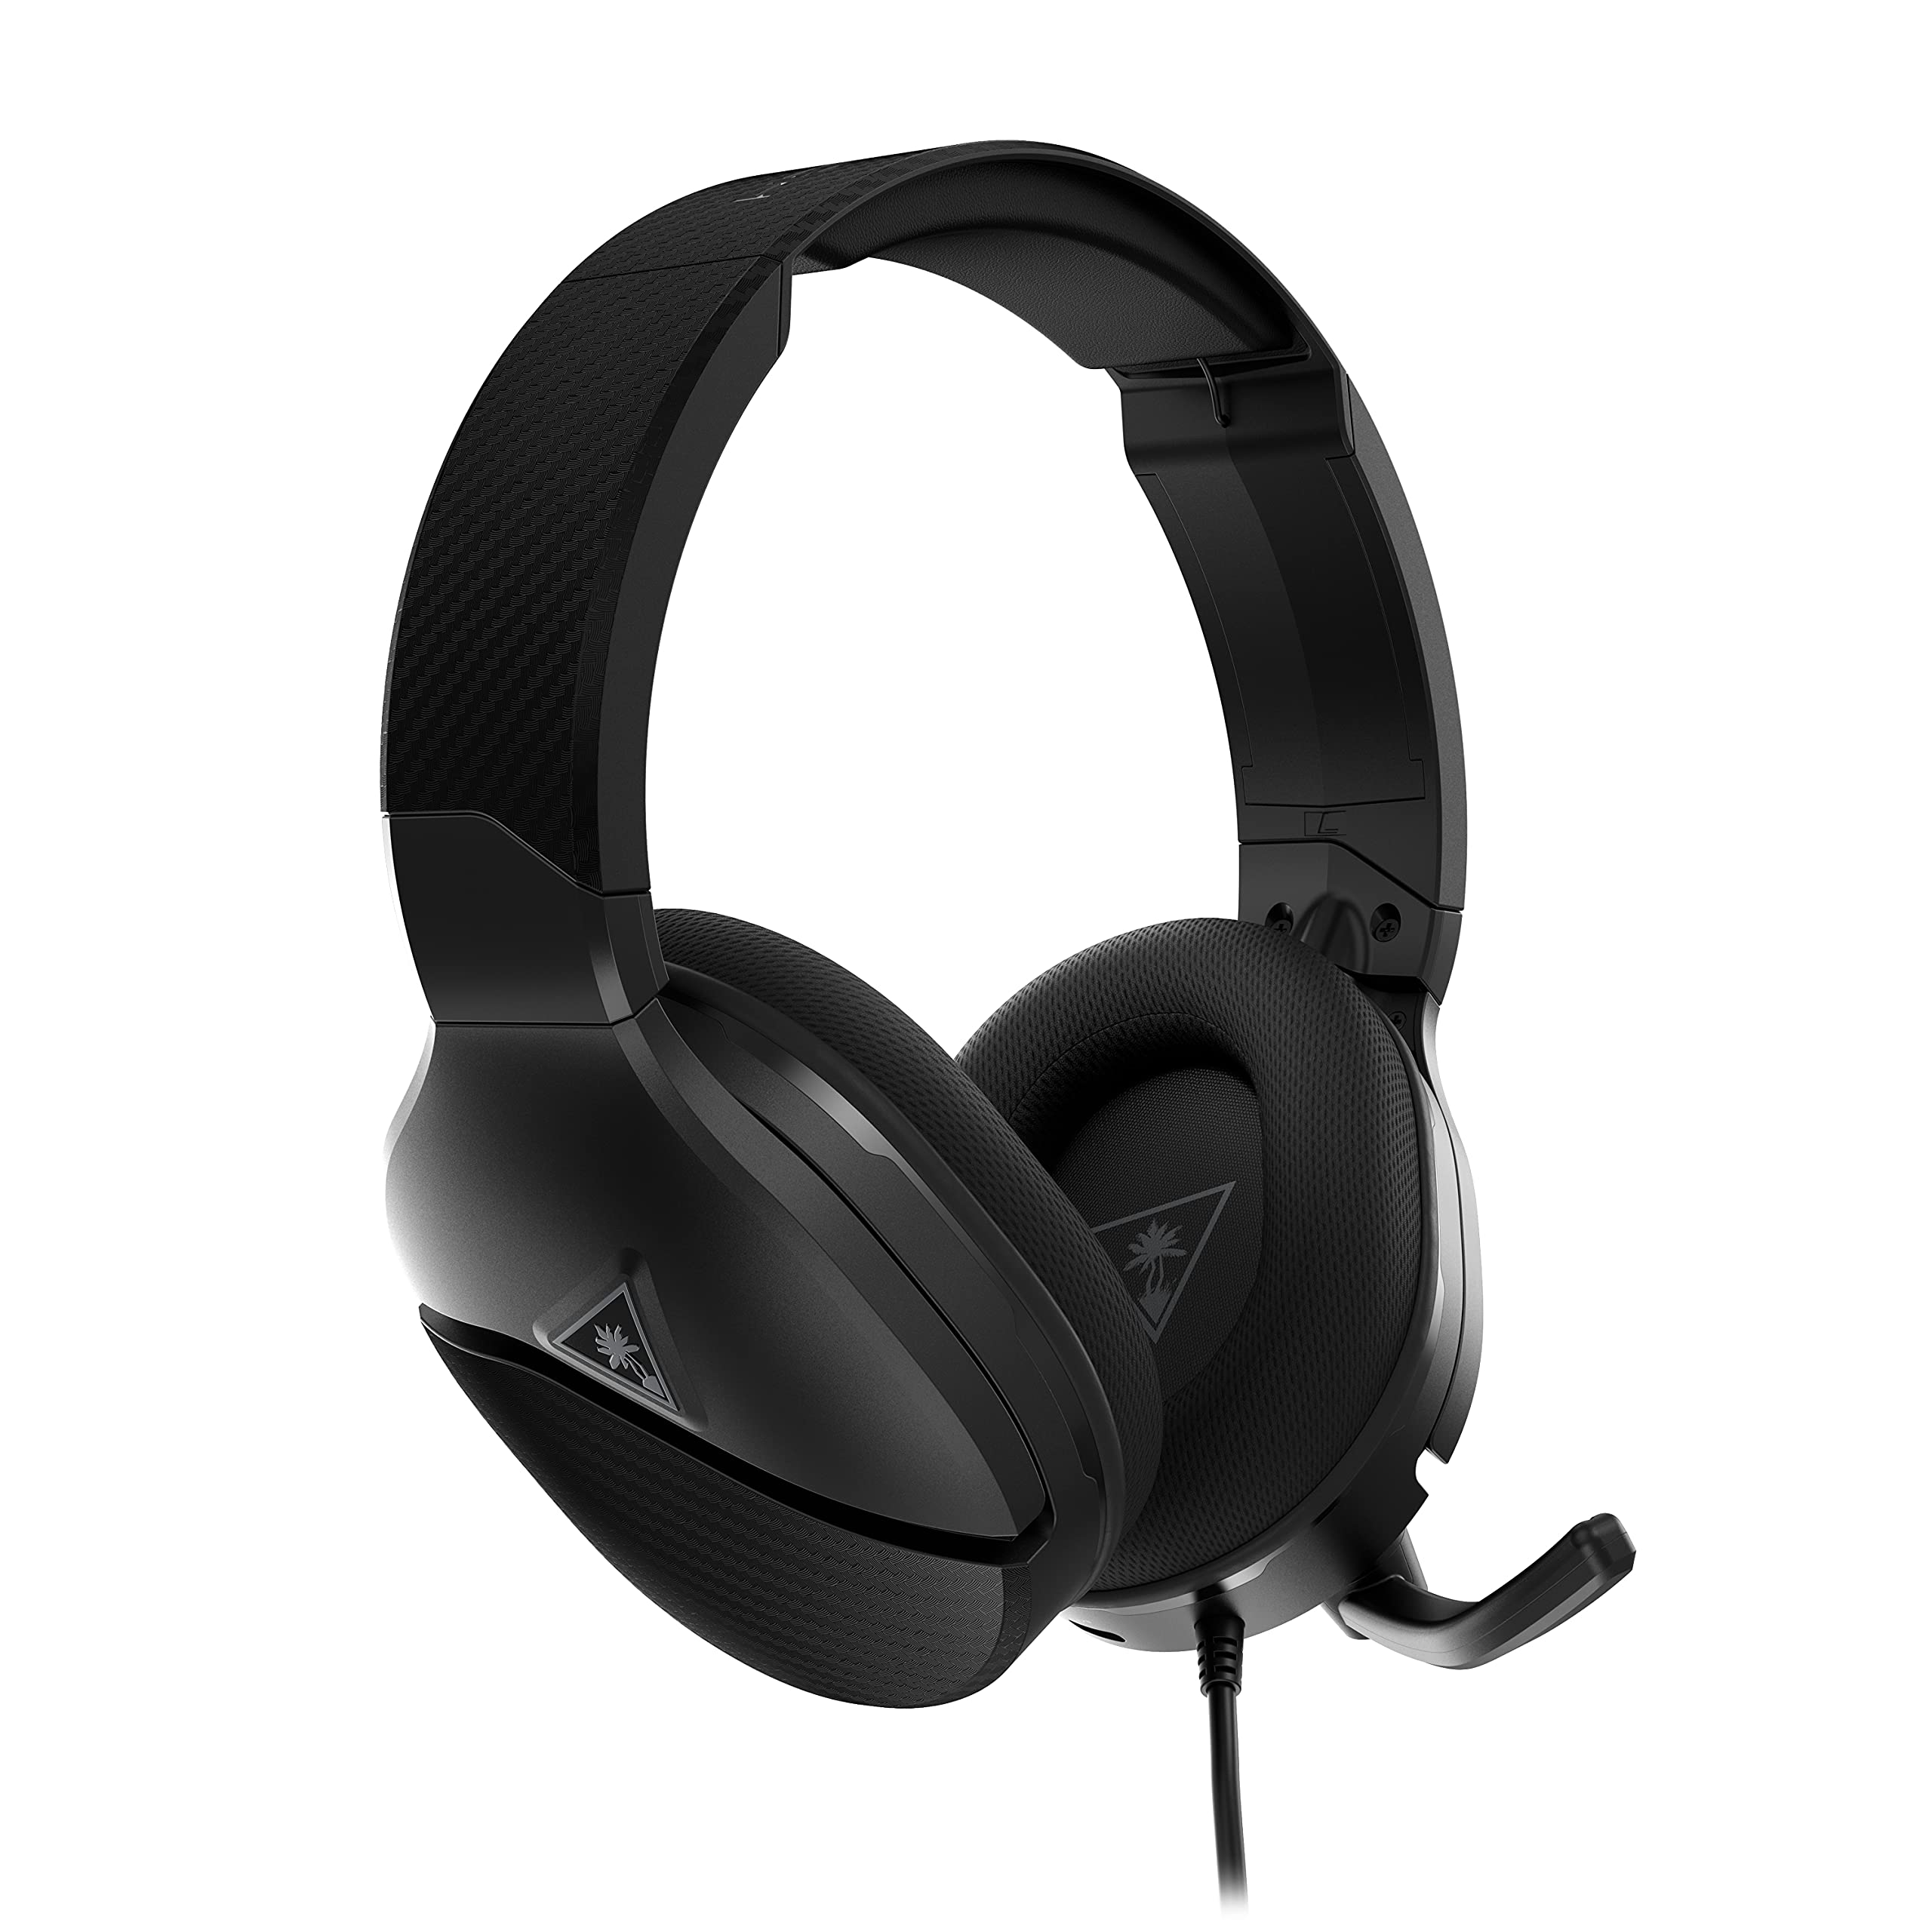 Turtle Beach Recon 200 Gen 2 Powered Gaming Headset for Xbox Series X, Series S & One, PlayStation 5, PS4, Nintendo Switch, Mobile, & PC with 3.5mm connection - Black